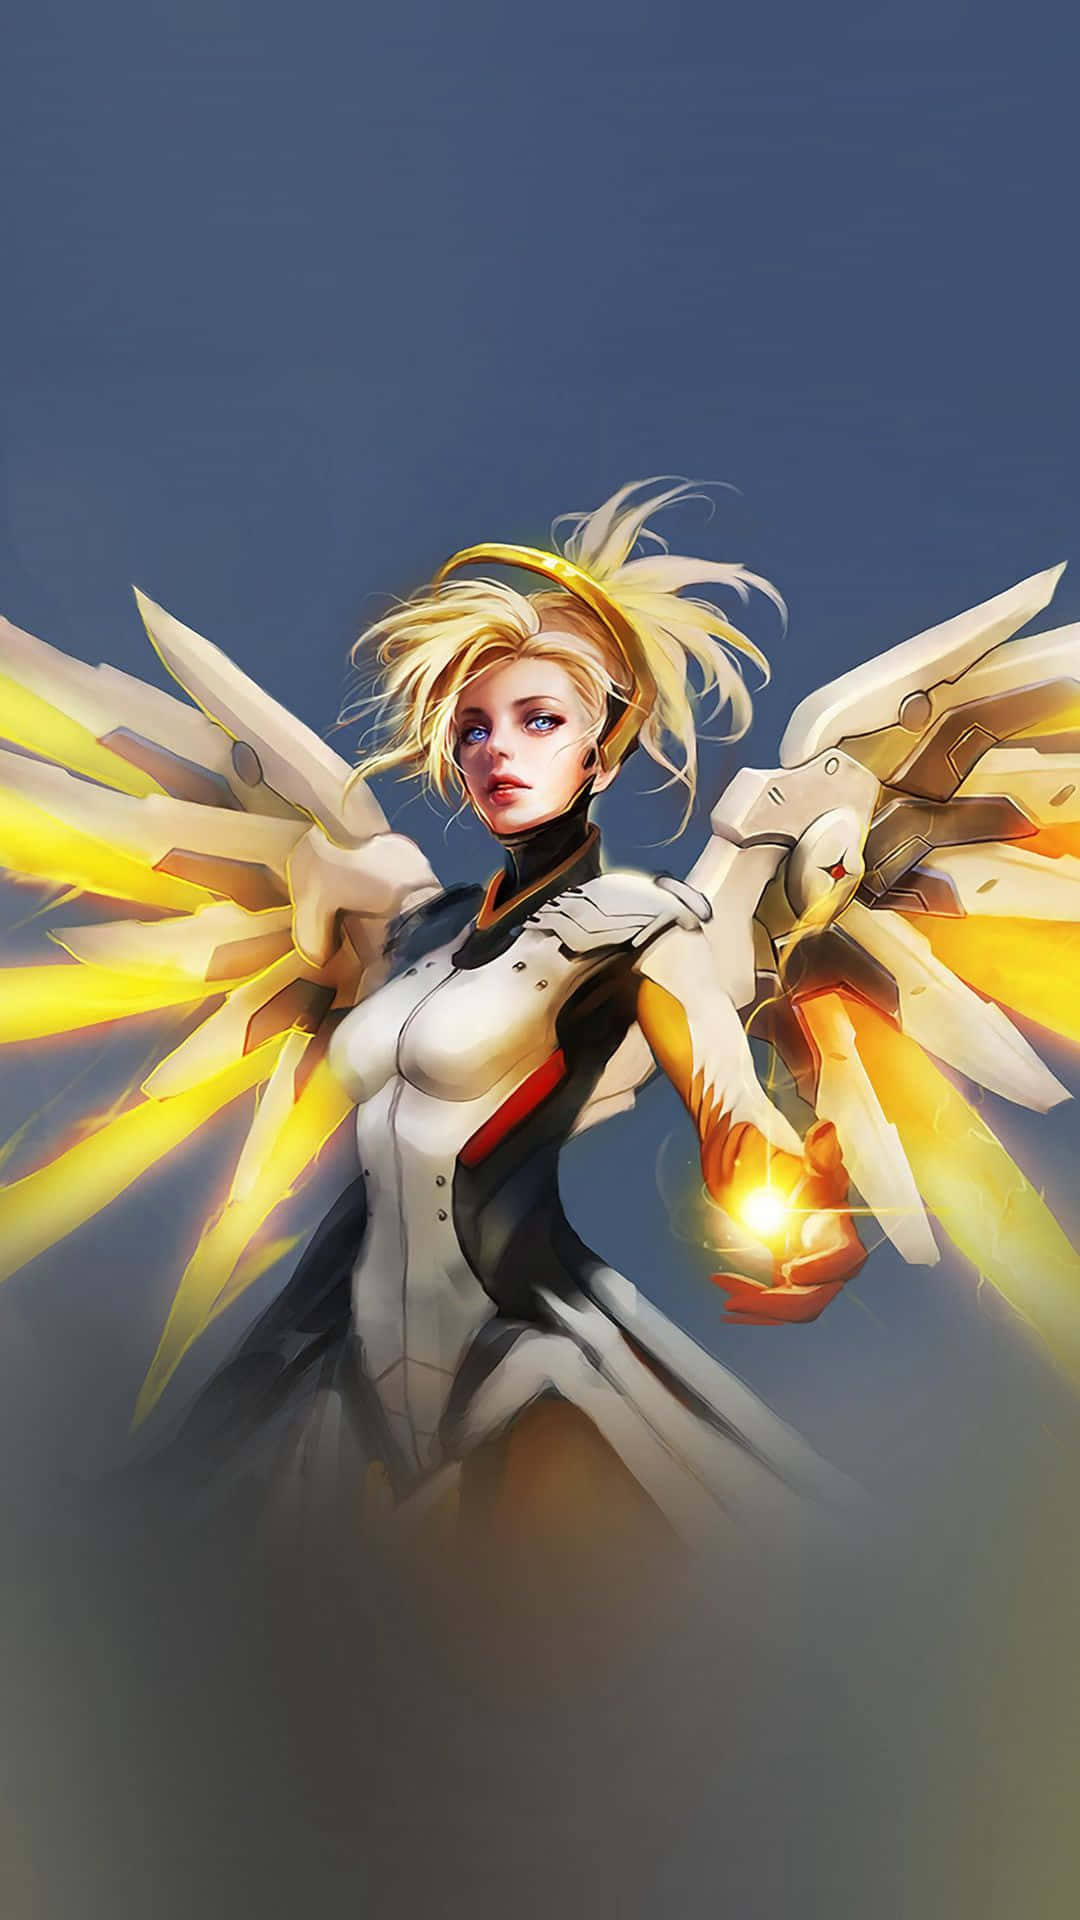 Overwatch Mercy Soaring Through The Skies Background